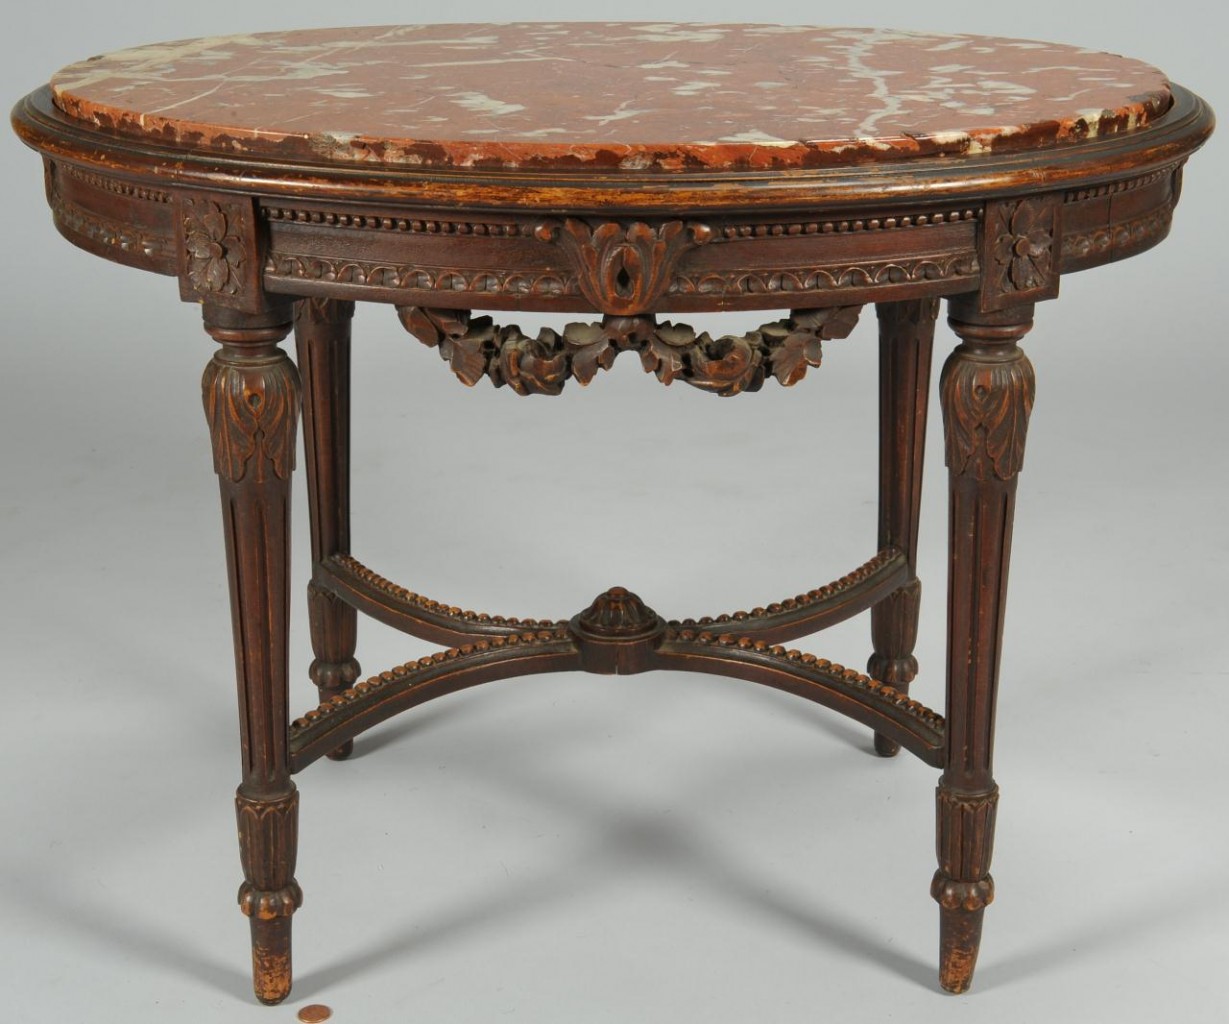 Lot 383: Elaborately Carved Italian Marble Stand